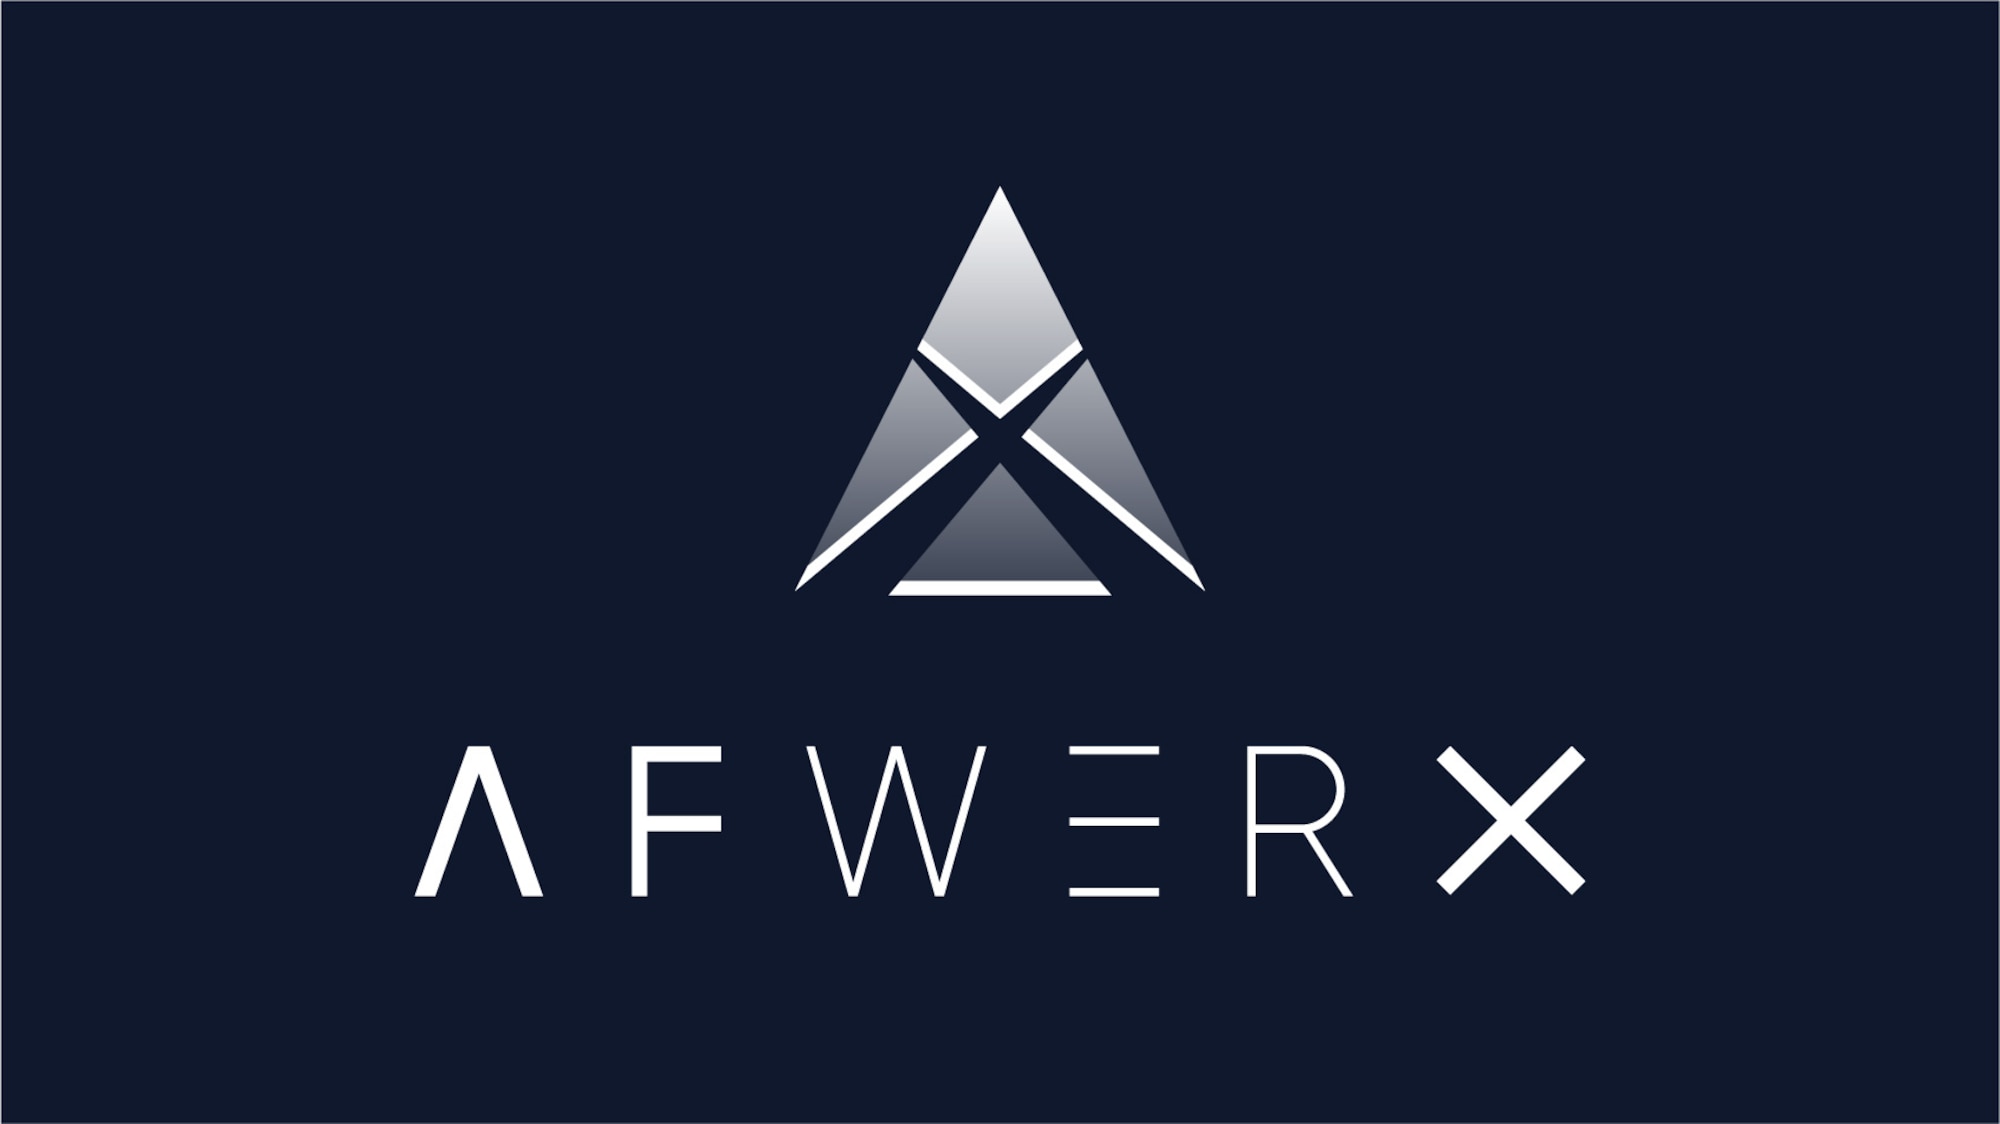 As a part of AFWERX, SpaceWERX will play a vital role in pursuing innovative technologies for the United States Space Force. The Department’s newest innovation arm will create platforms for space operators, lab engineers, and acquisition professionals to collaborate with the brightest minds in academia and industry pursuing novel solutions. Moreover, SpaceWERX will continue to leverage proven AFWERX tools such as the SBIR Open Topic, Challenge platform, STRATFI initiative, and Prime program. (Courtesy graphic/AFWERX)